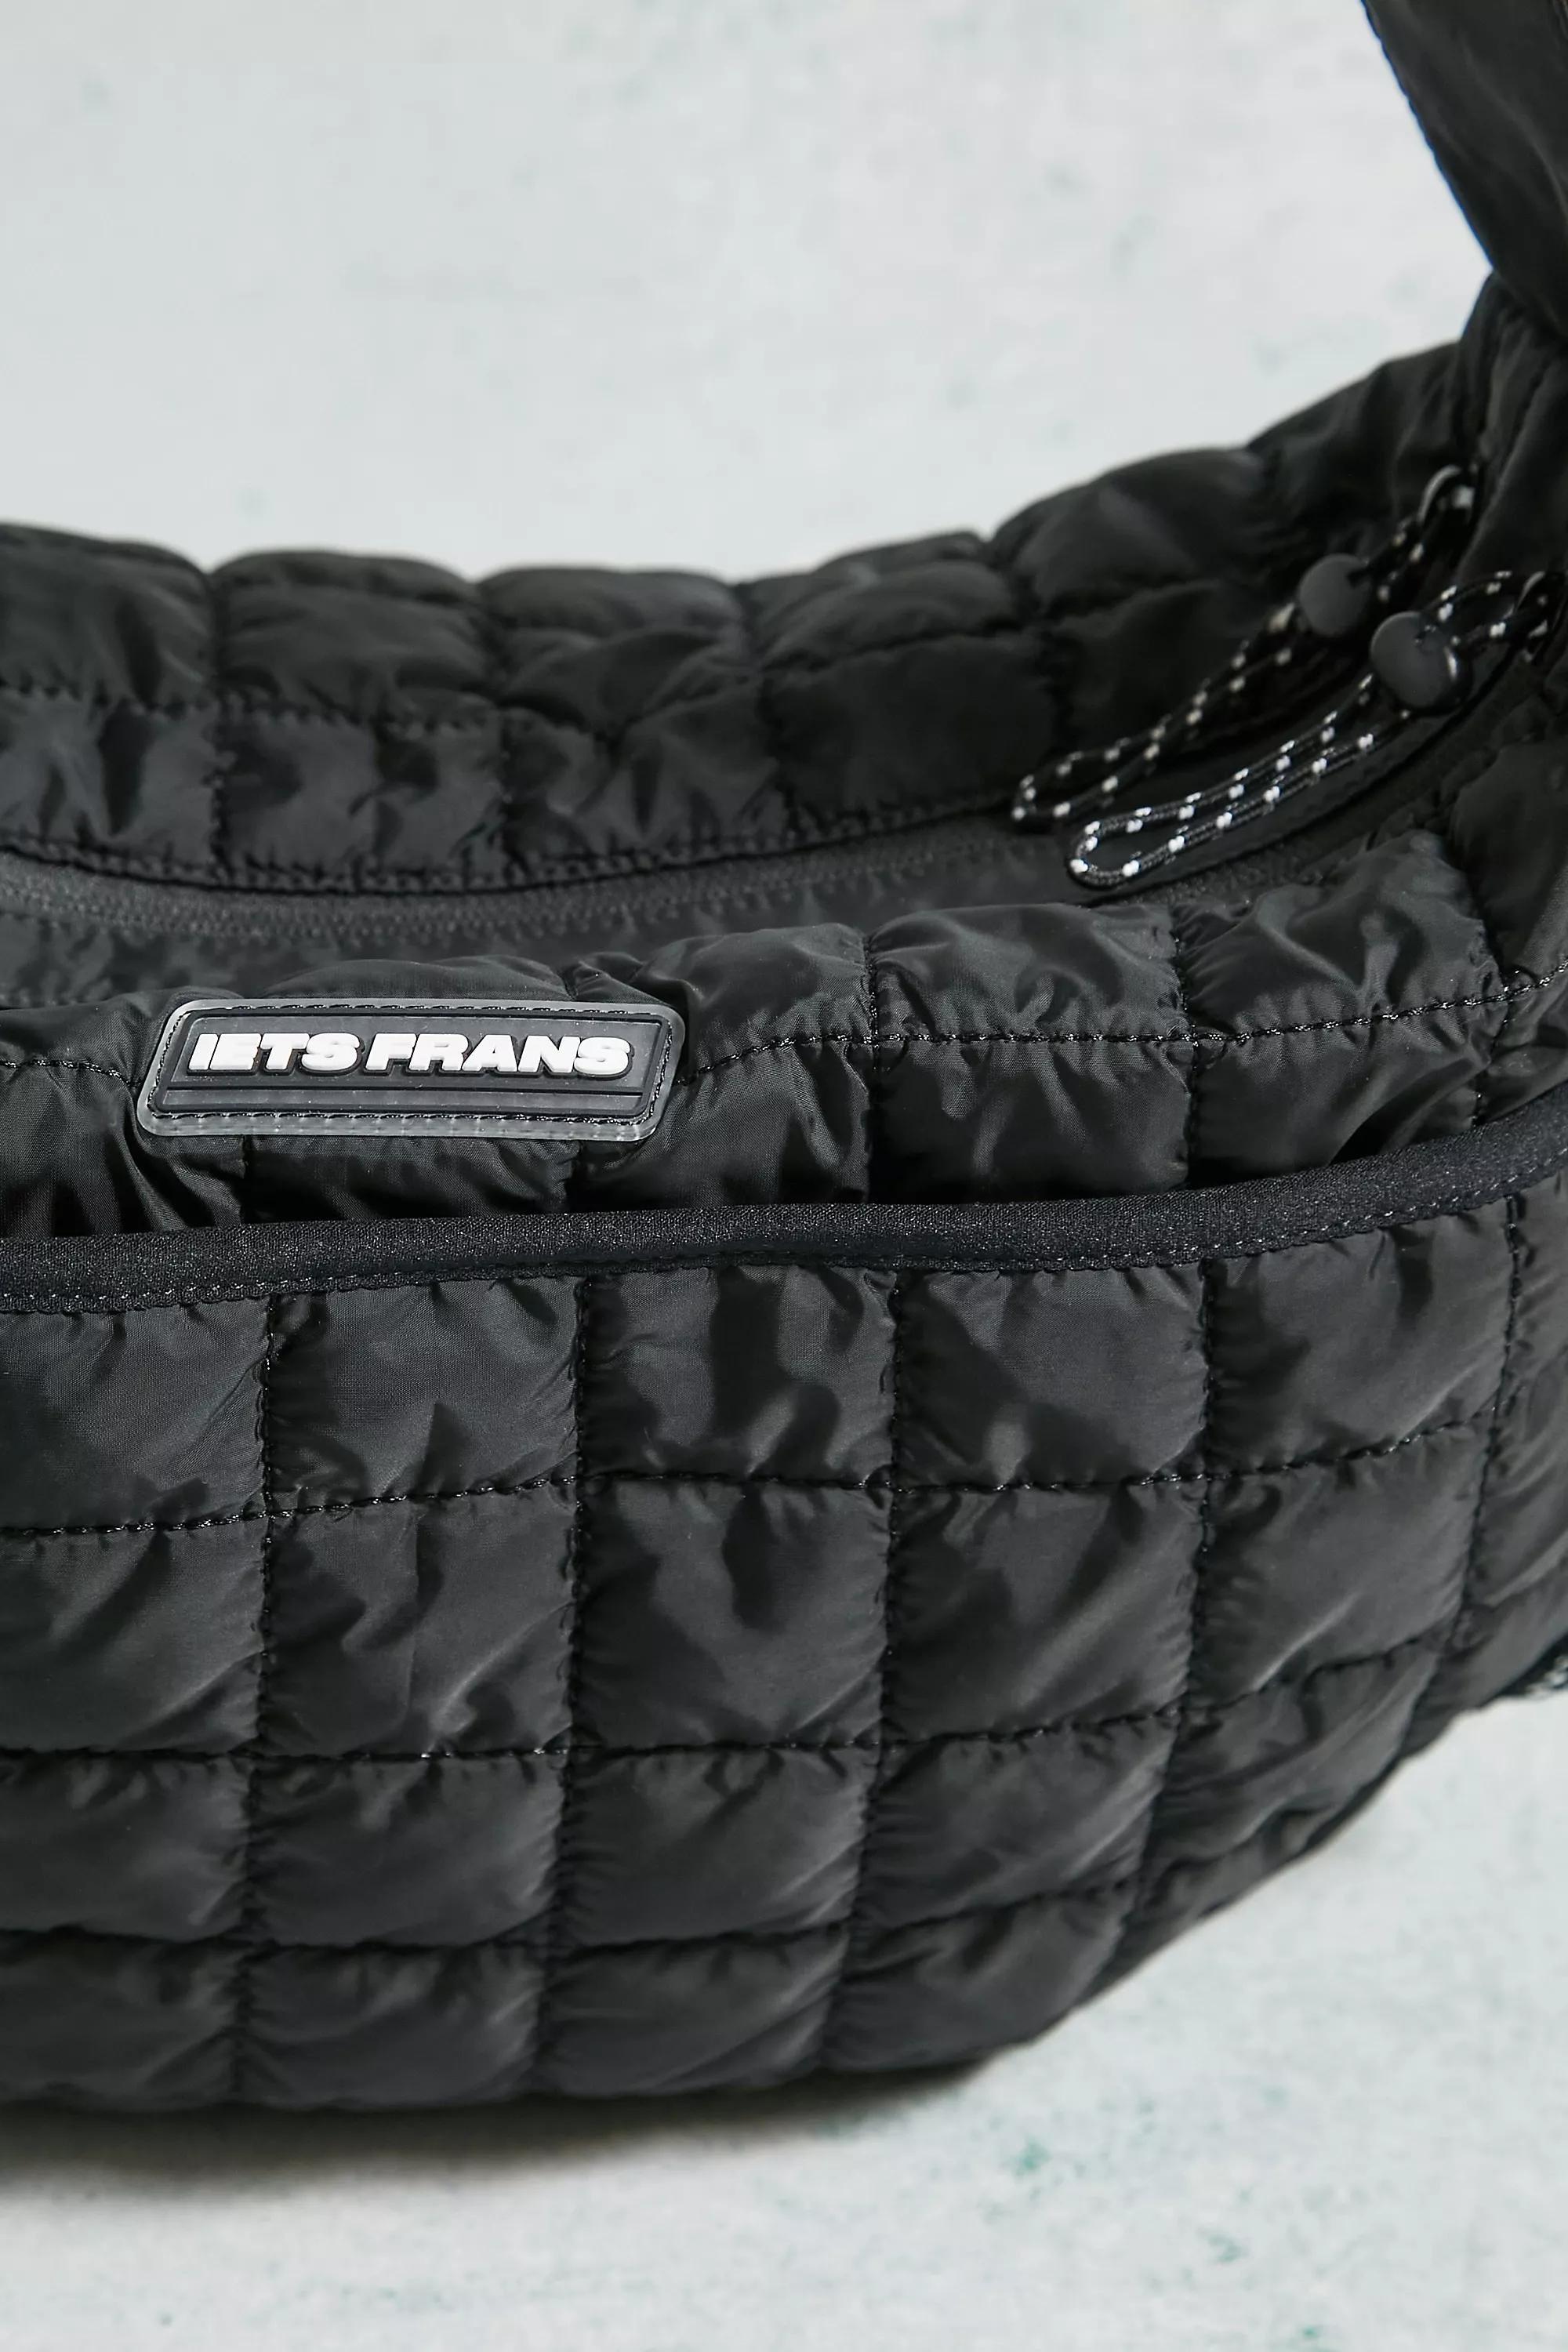 Urban Outfitters - Black Puffer Sling Bag